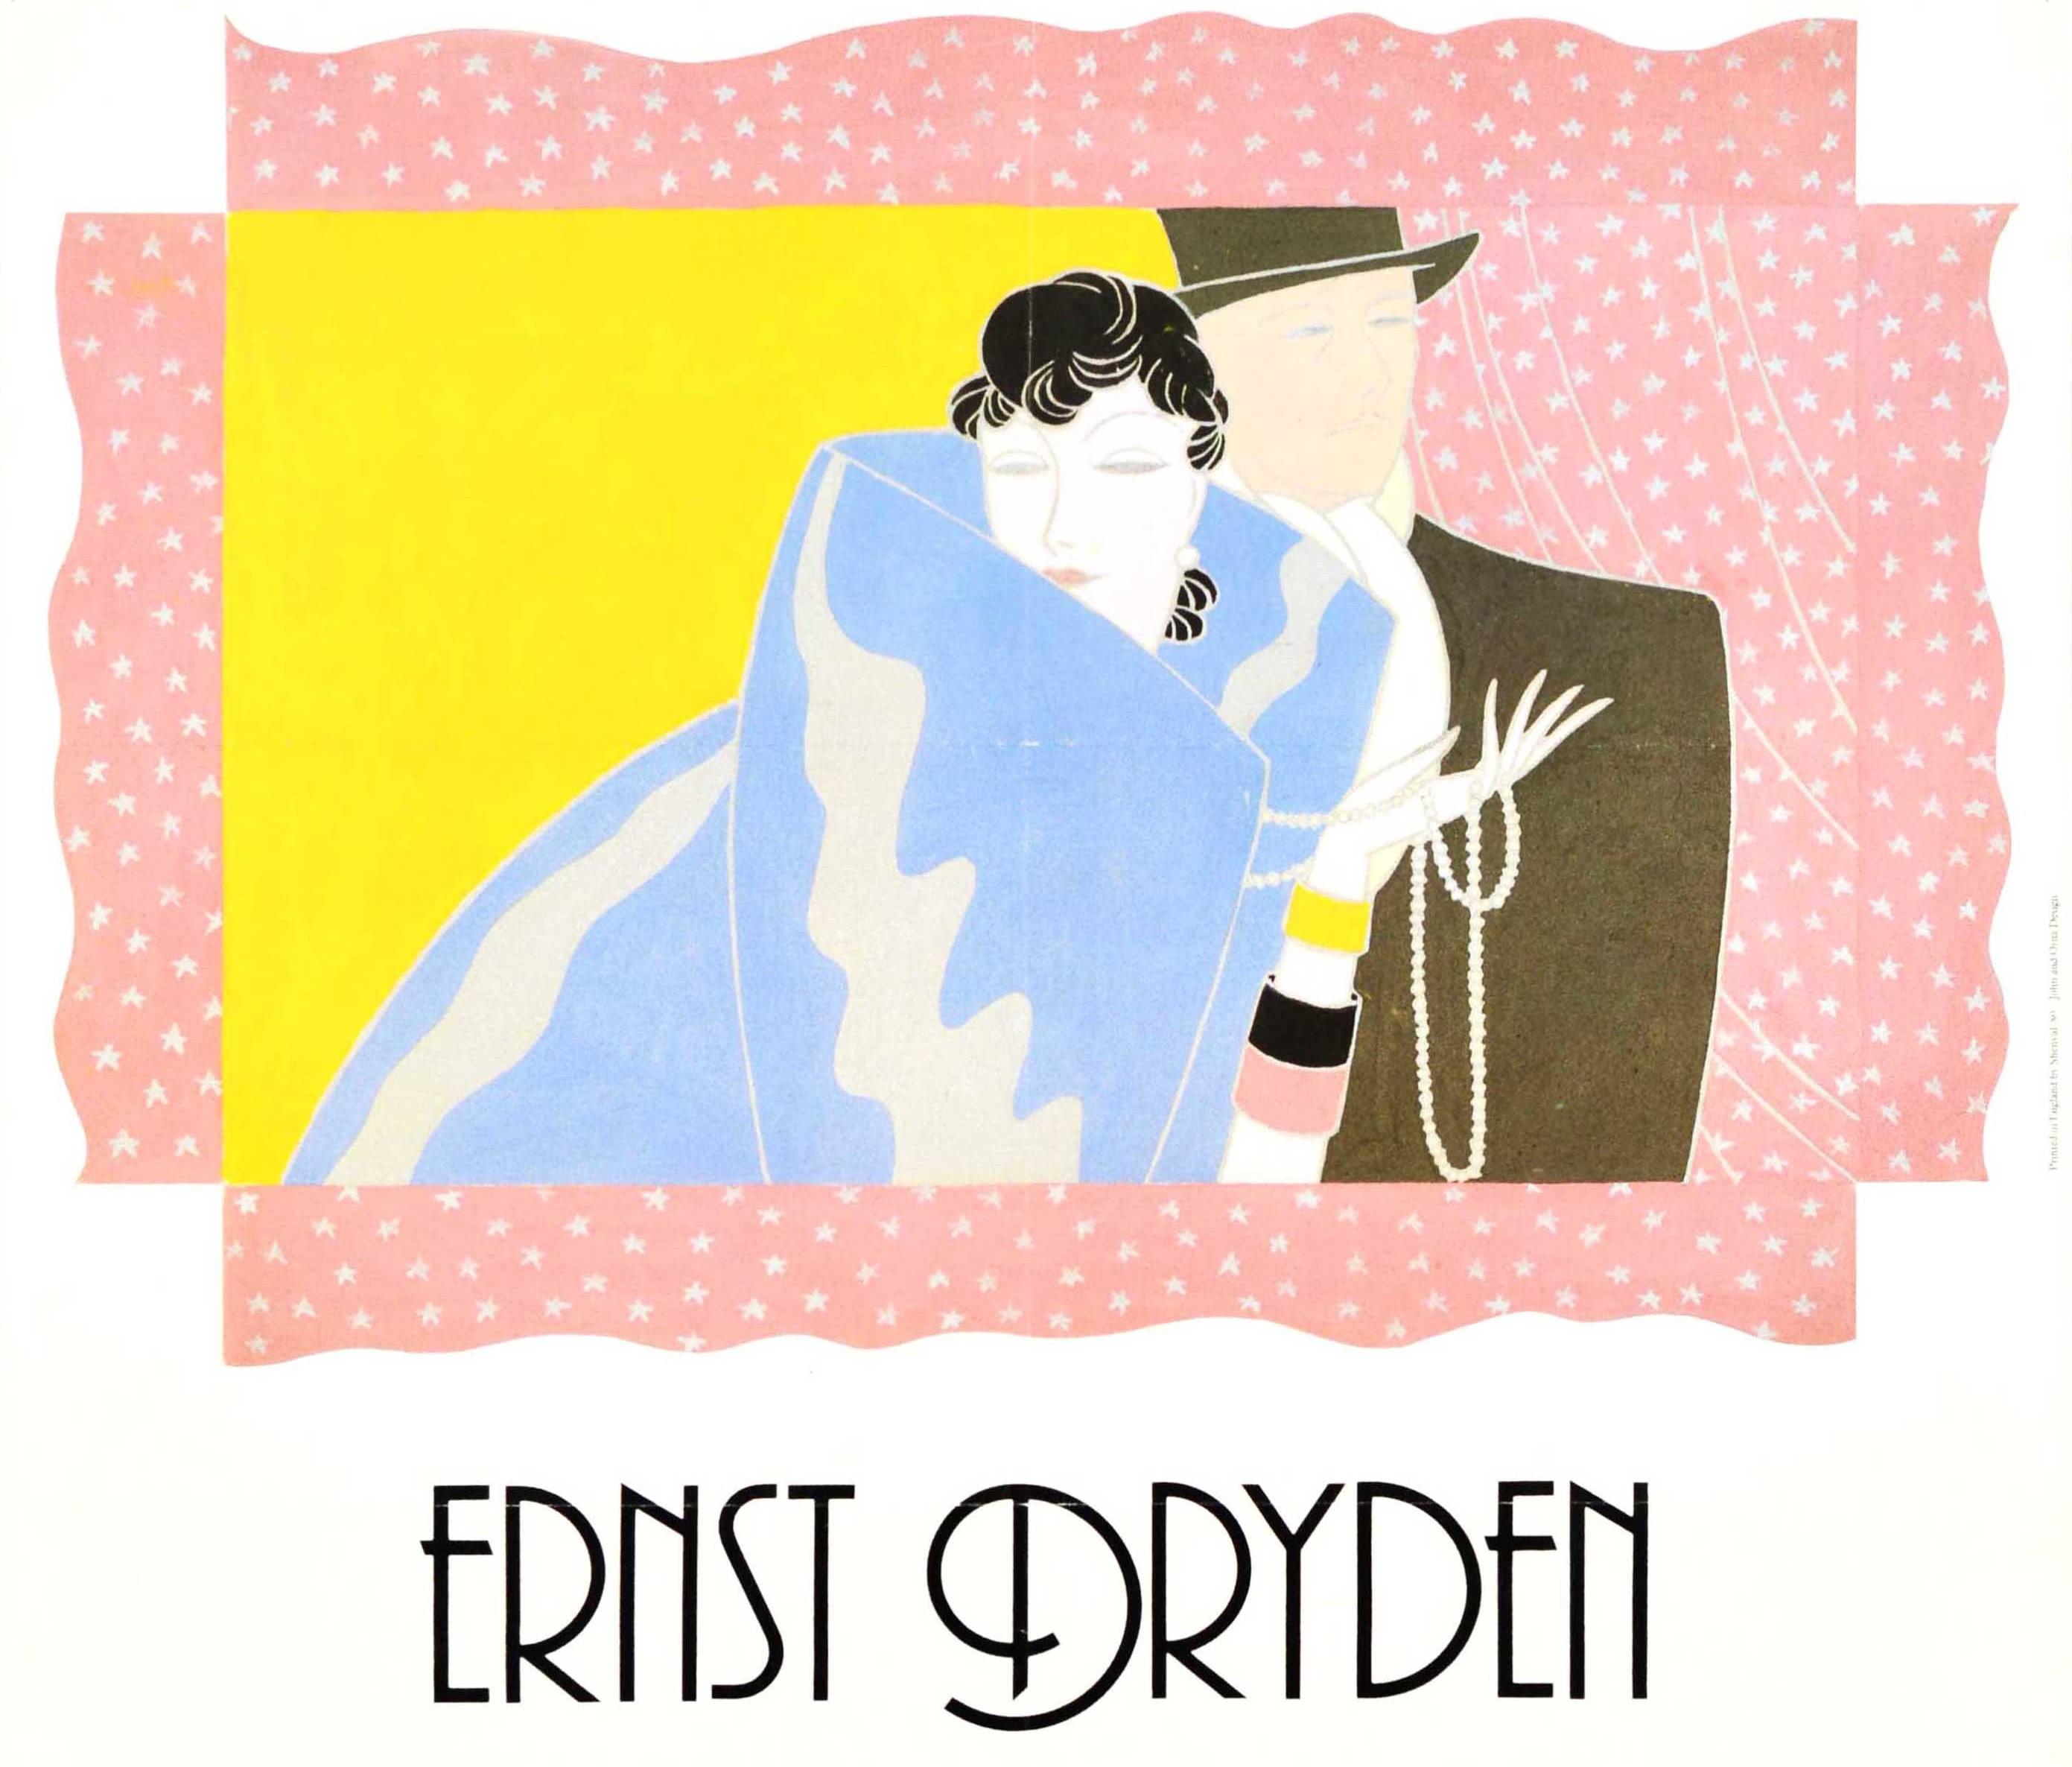 Original vintage poster for A Camden Arts Touring Exhibition of work by the graphic artist and costume and fashion designer Ernst Dryden (Ernst Deutsch; 1887-1938) from 8 October to 5 November 1983 at the Stoke-on-Trent City Museum & Art Gallery